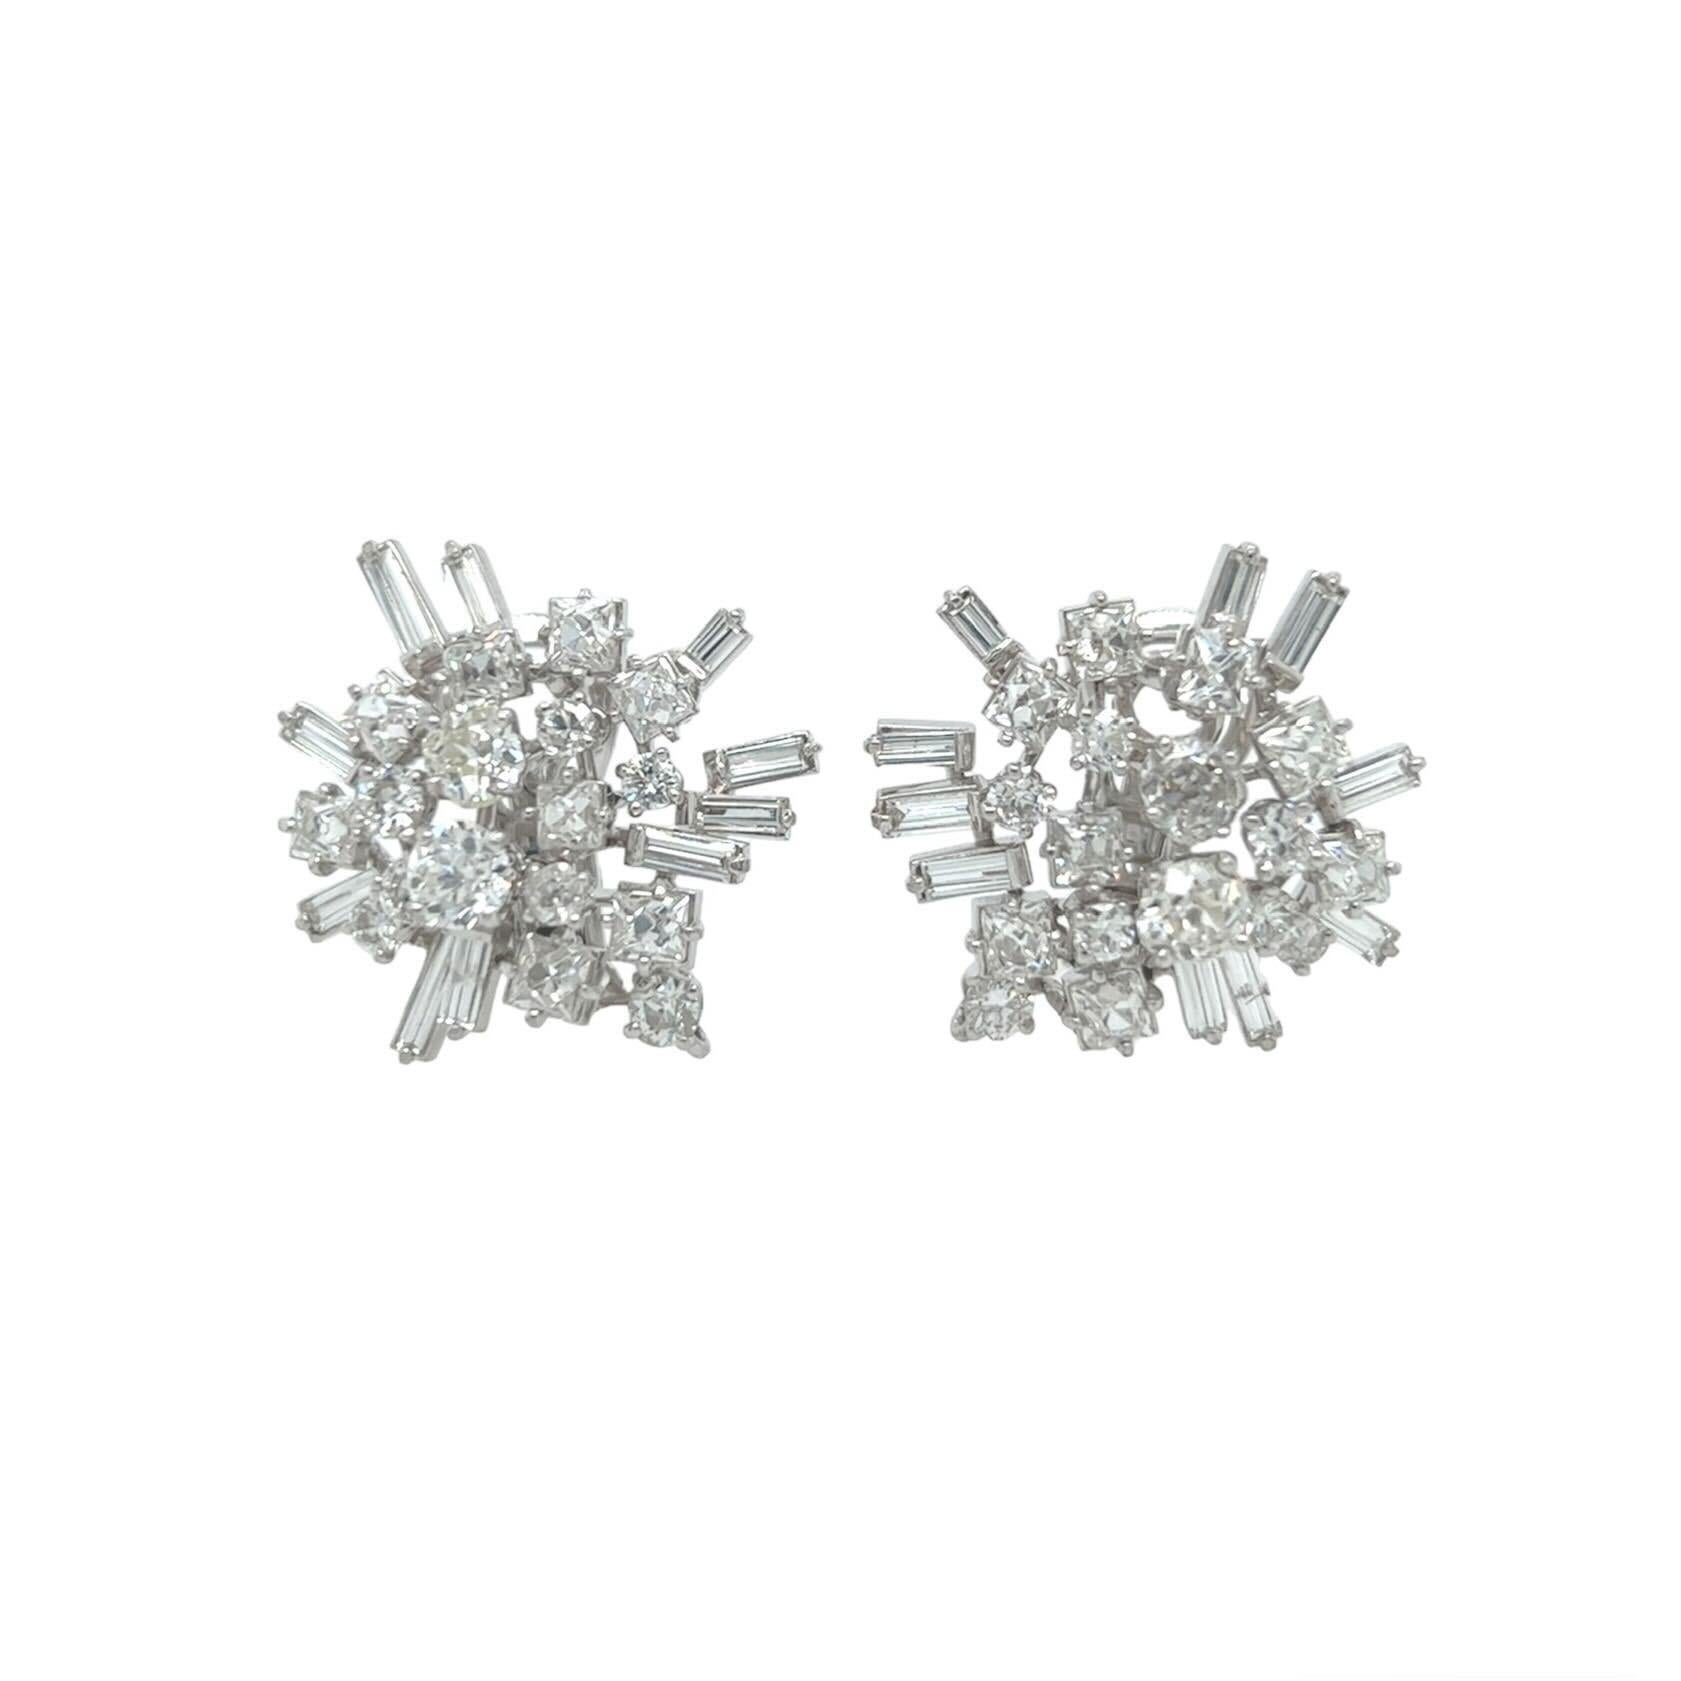 A Pair of Platinum and Diamond Earrings In Excellent Condition For Sale In New York, NY